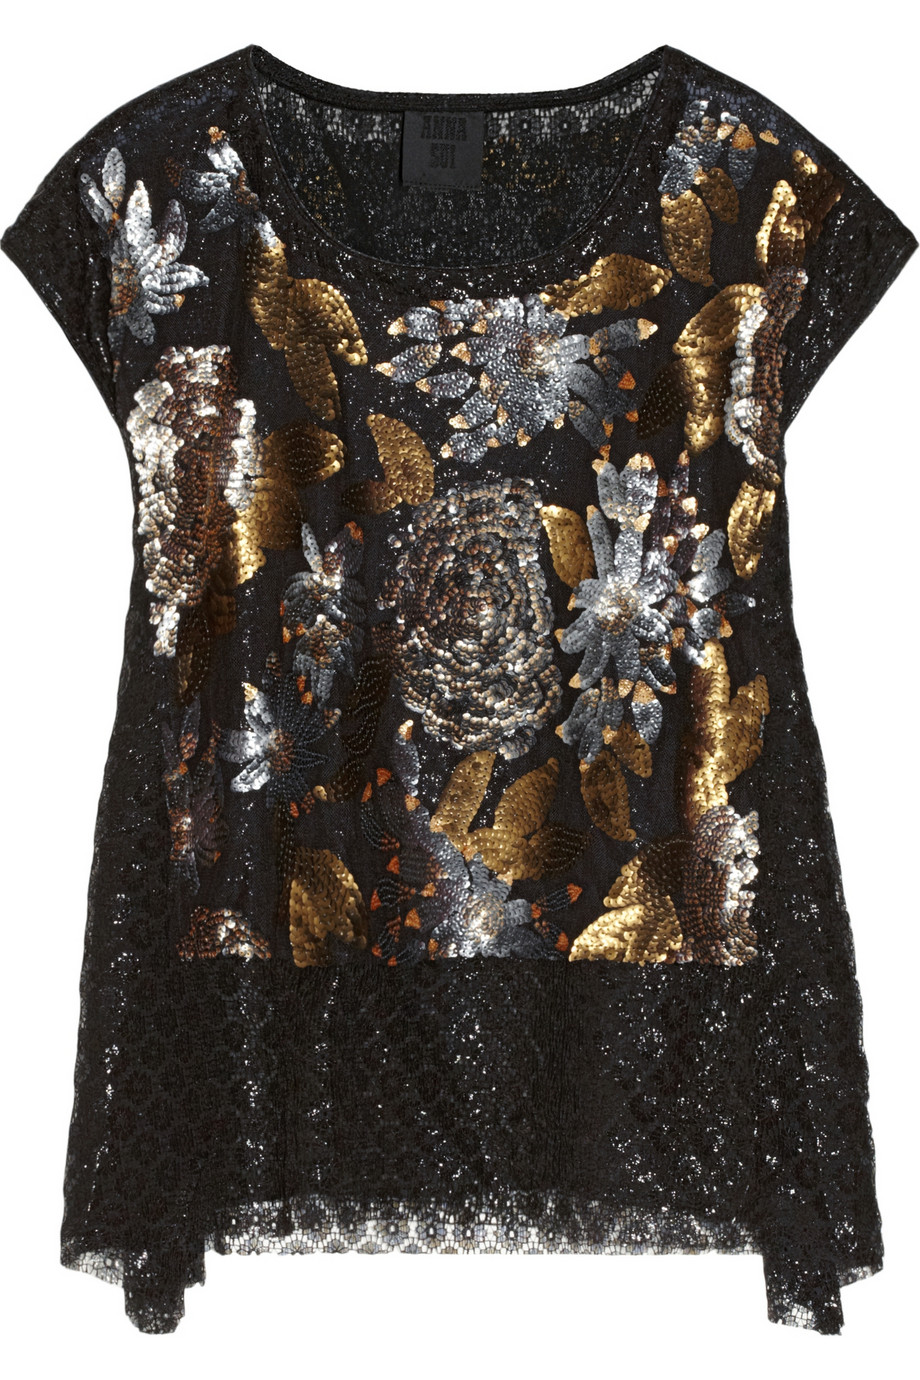 Lyst - Anna Sui Sequined Tulle And Lace Top in Metallic